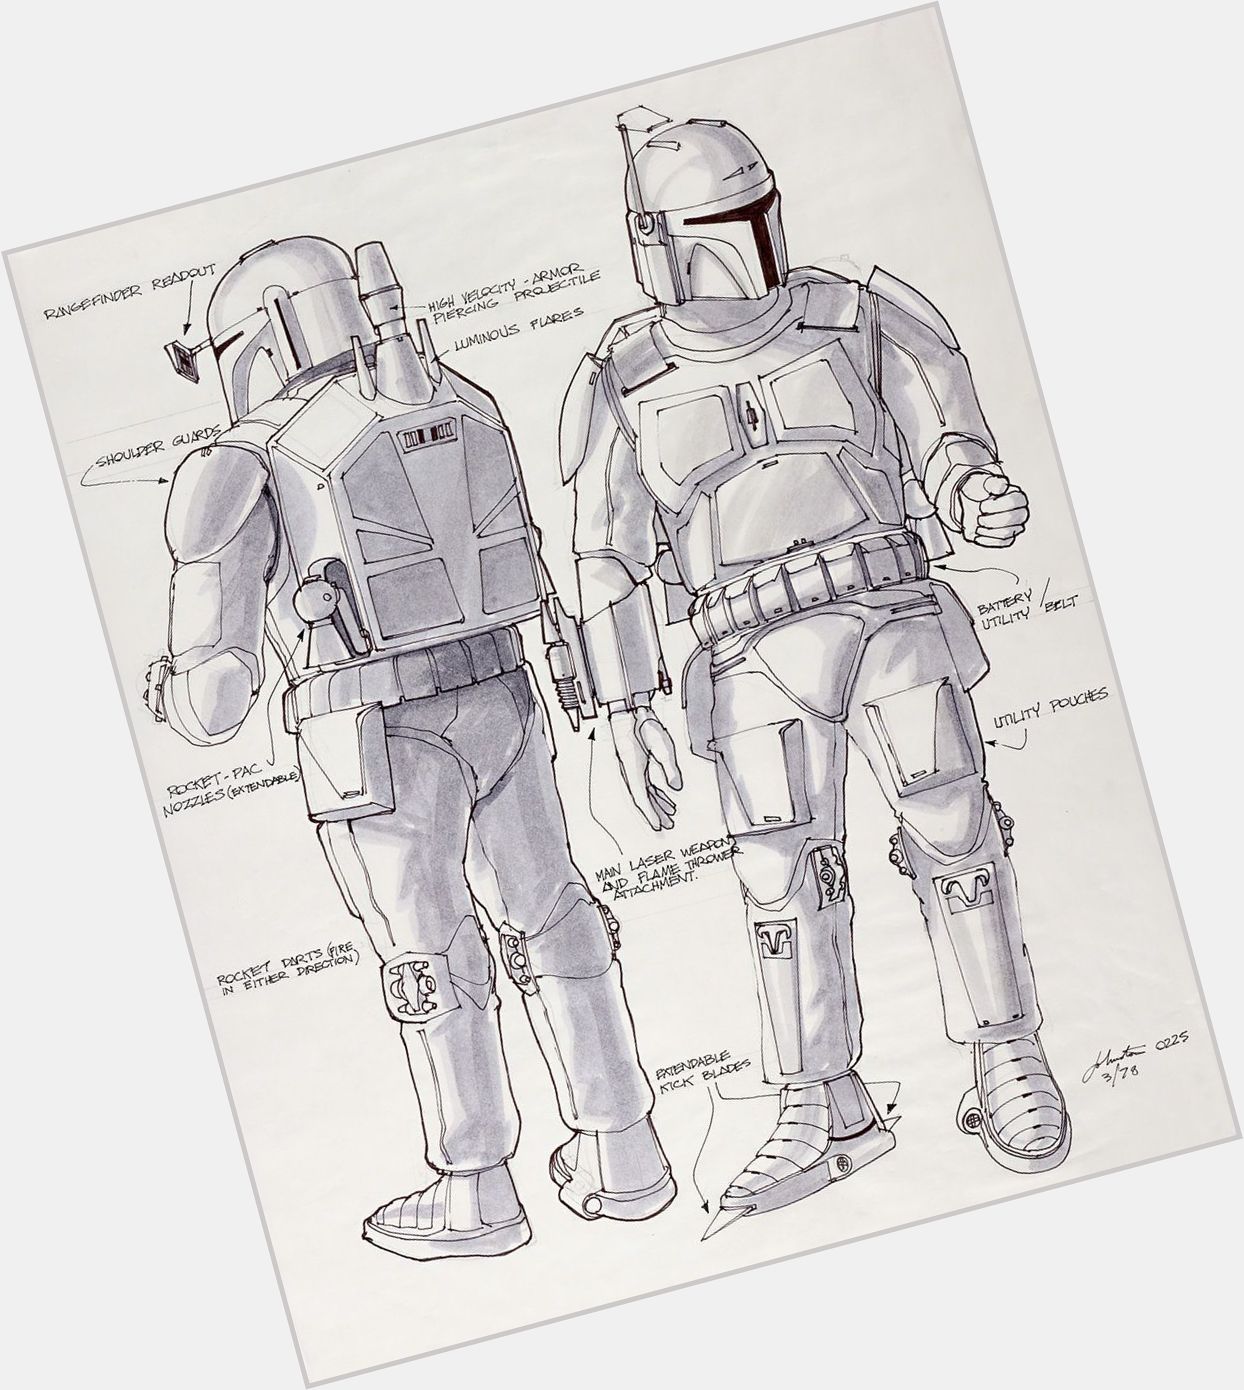 Happy birthday to Joe Johnston! One of the men responsible for the recognizable look of Boba Fett! 